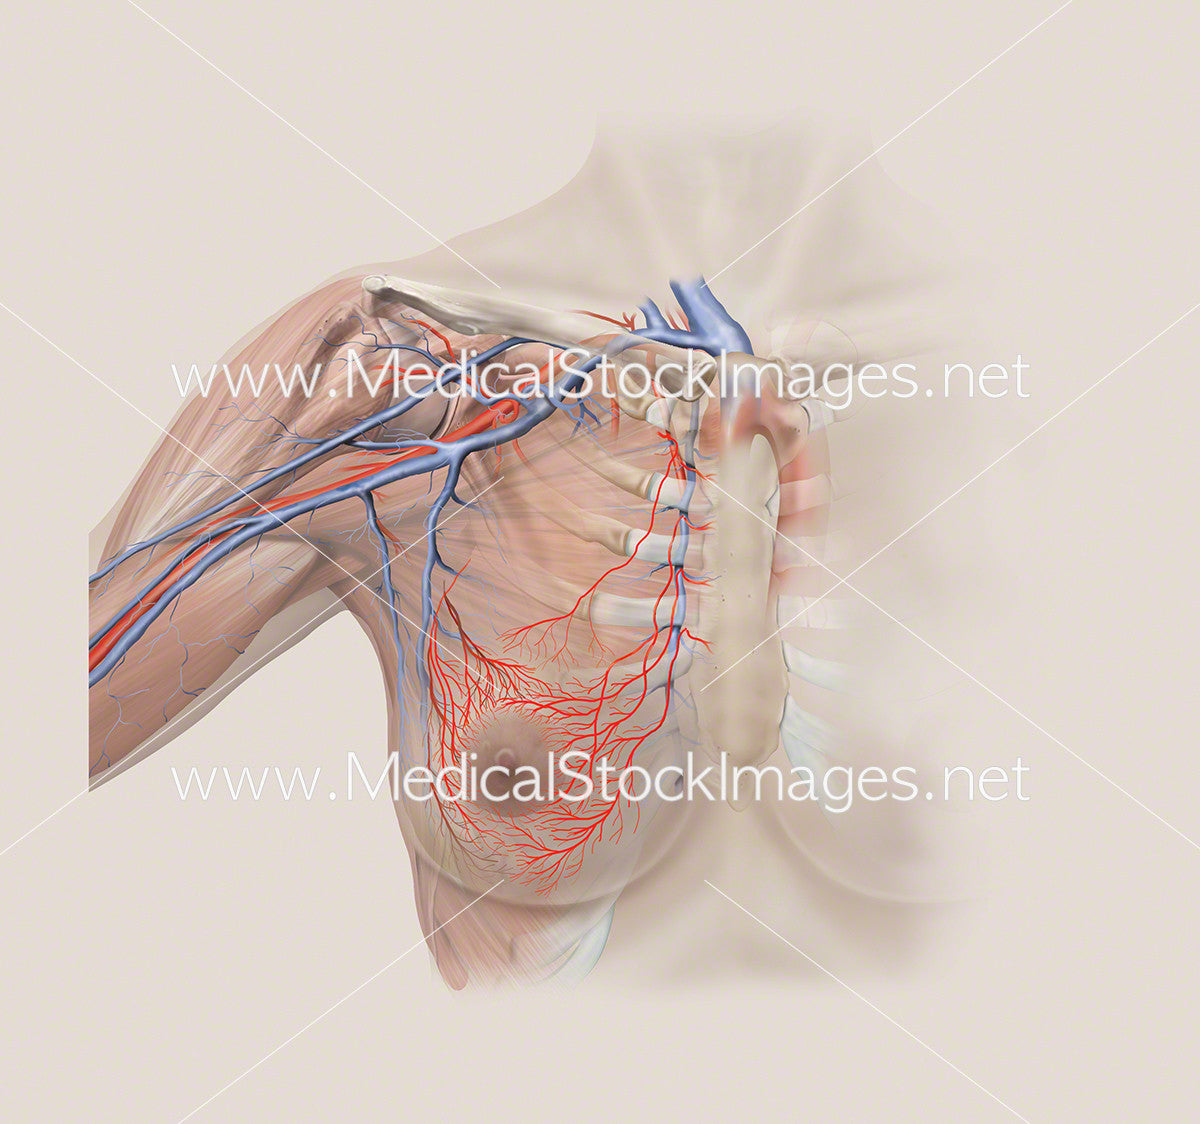 Arterial And Skeletal Anatomy Upper Torso Medical Stock Images Company